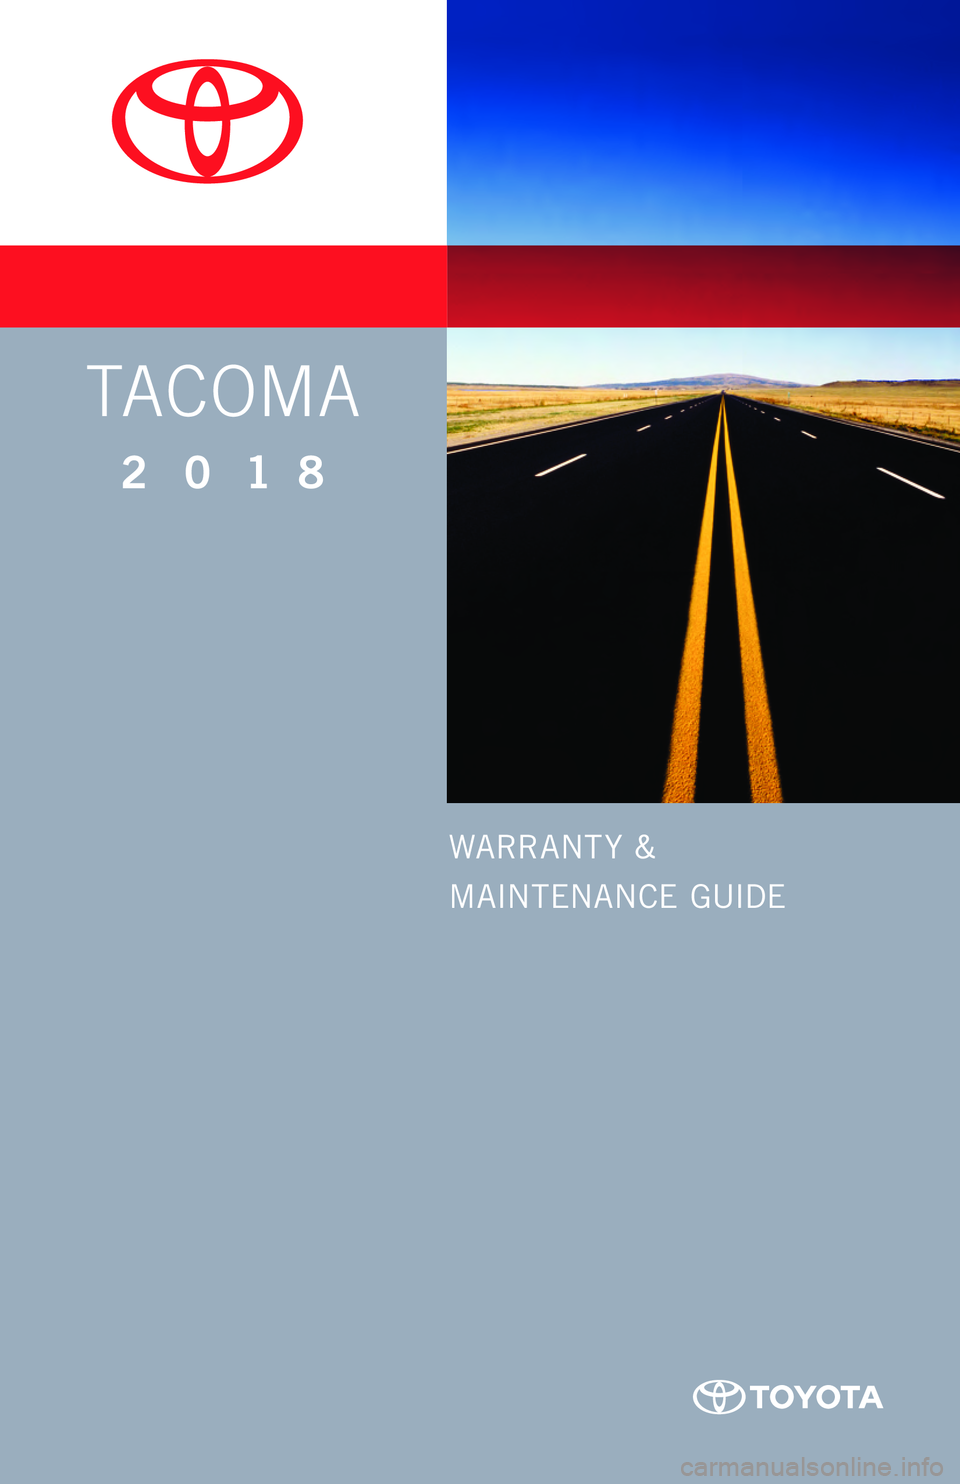 TOYOTA TACOMA 2018  Warranties & Maintenance Guides (in English) WARRANT Y &
MAINTENANCE  GUIDE
TA C OM A
2018     
17-TCS-10006_WMG_TACOMA_1_0F_lm.indd   29/25/17   7:58 PM  